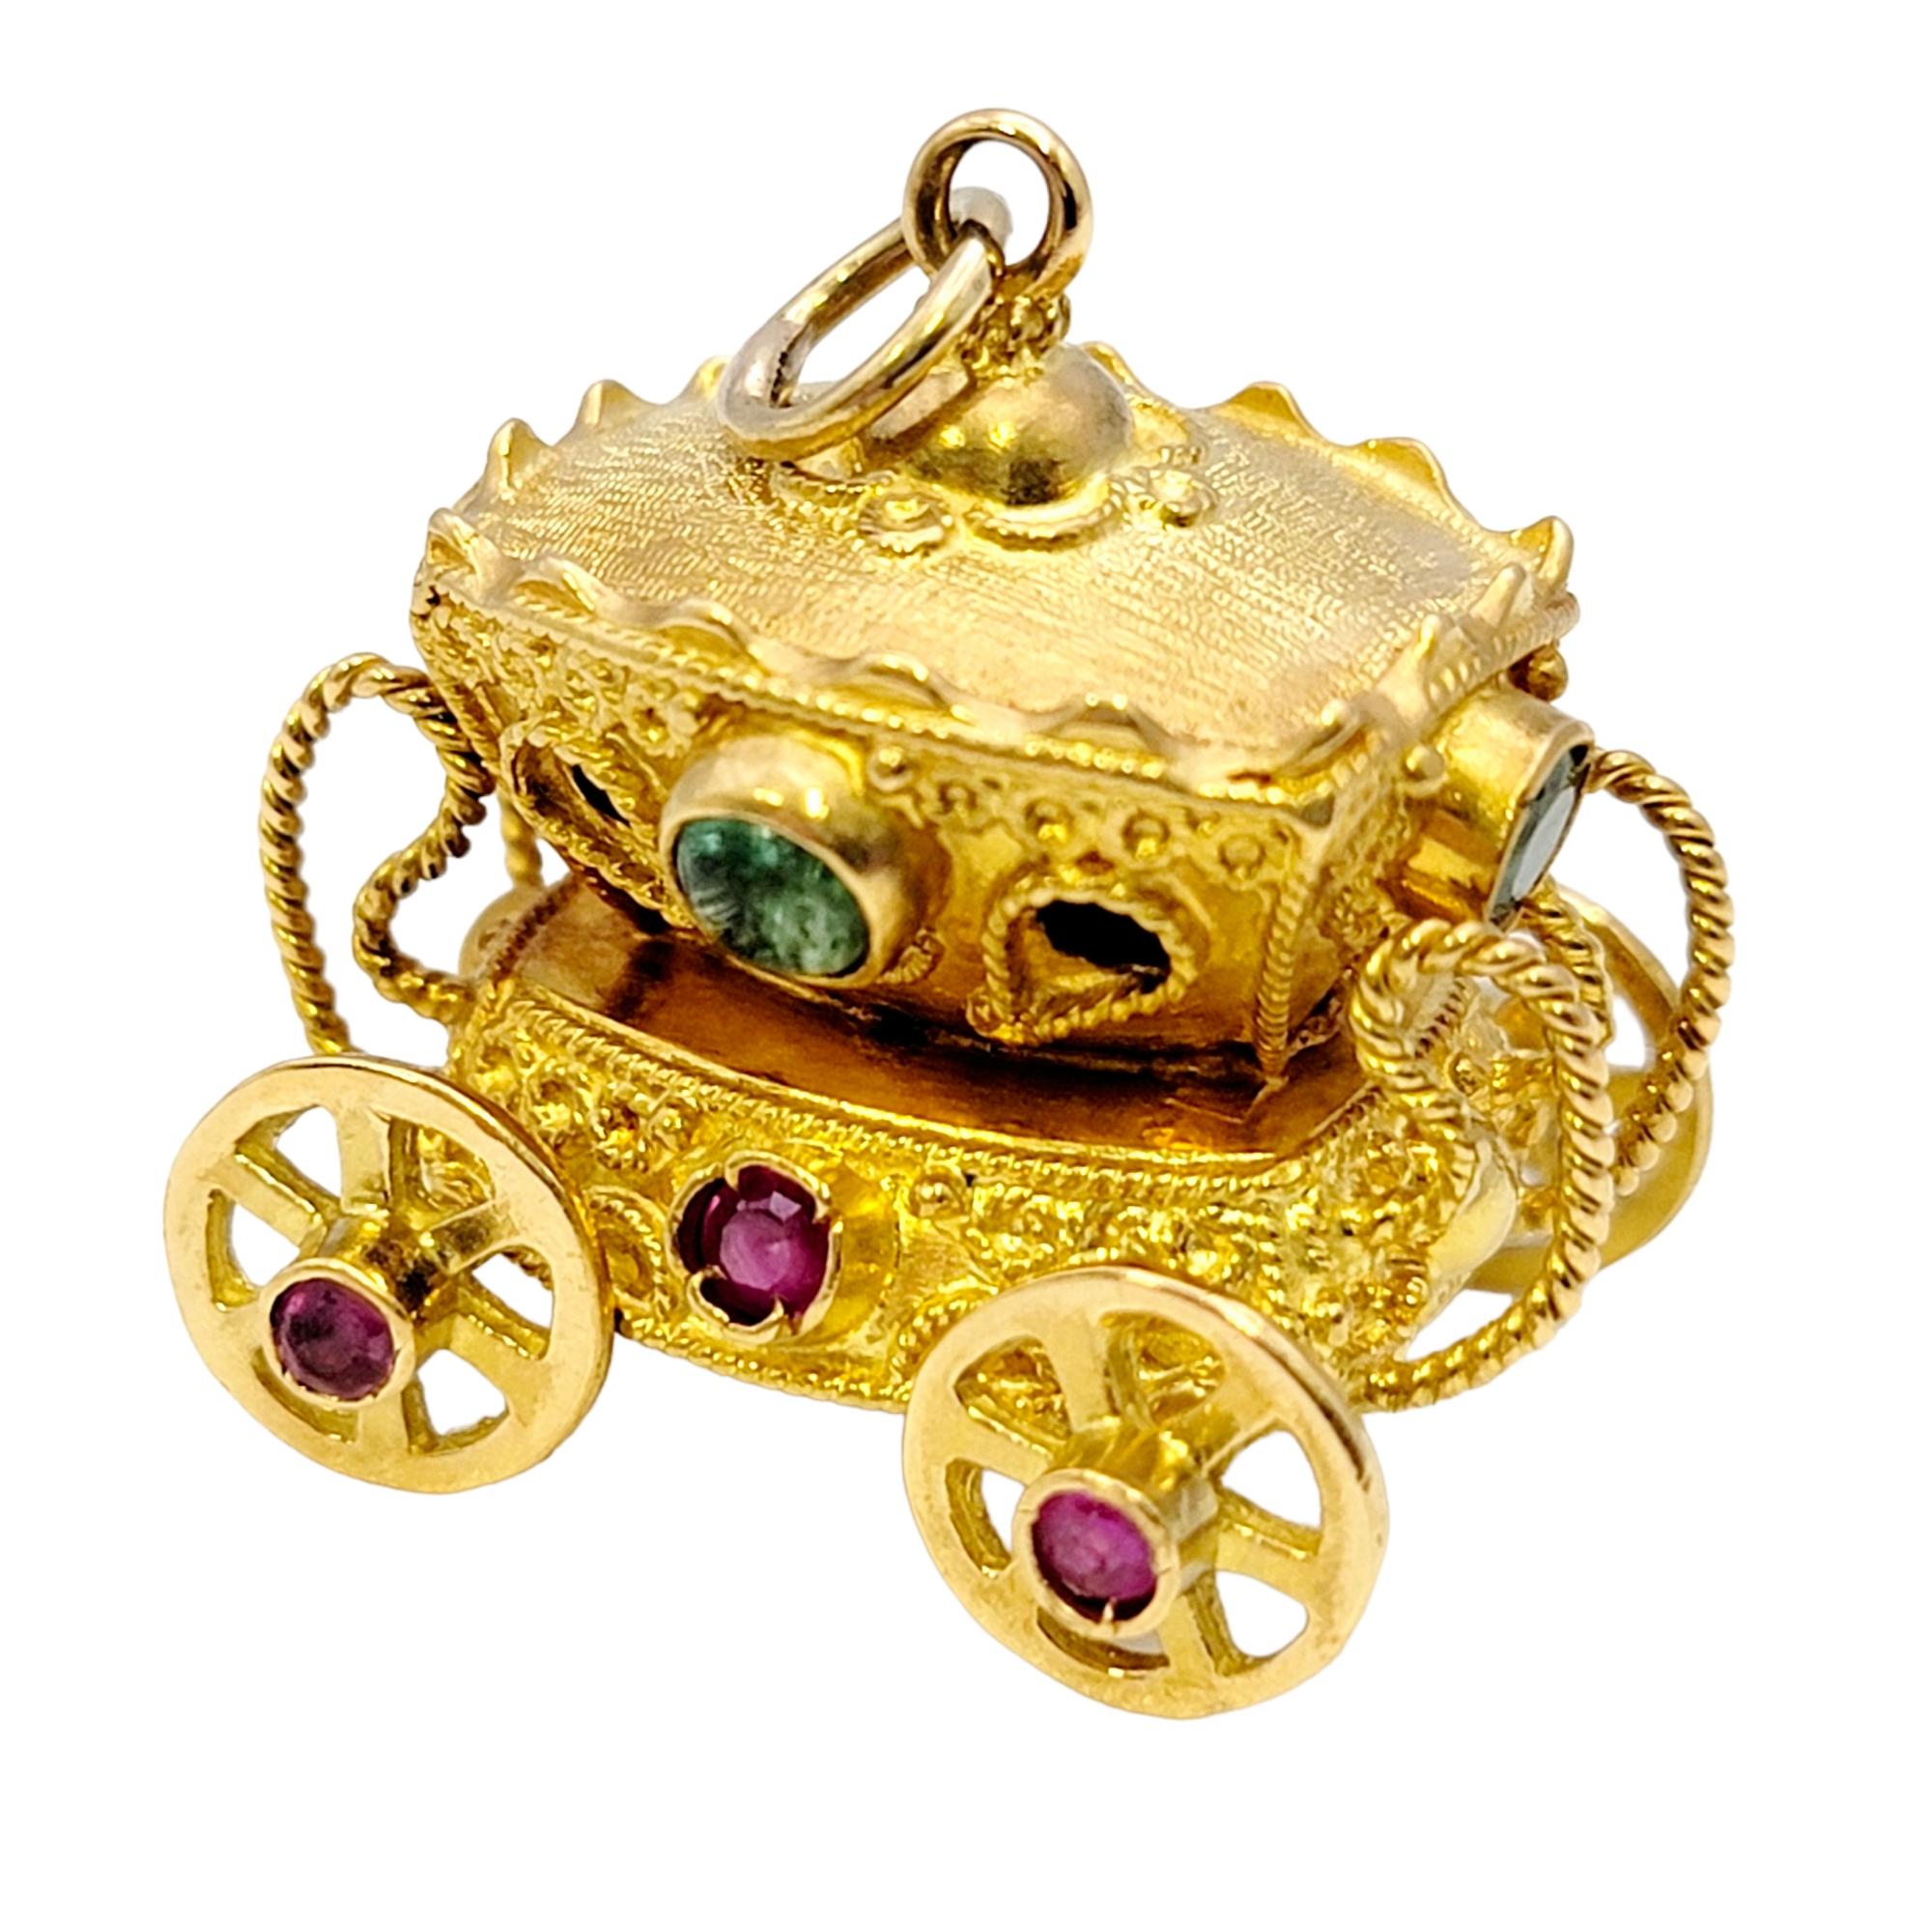 Unique multi-gemstone carriage charm/pendant with incredible fine details. The perfect addition to your favorite charm bracelet or necklace, this lovely piece is a miniature work of art. 

This charming piece features an intricately carved 18 karat